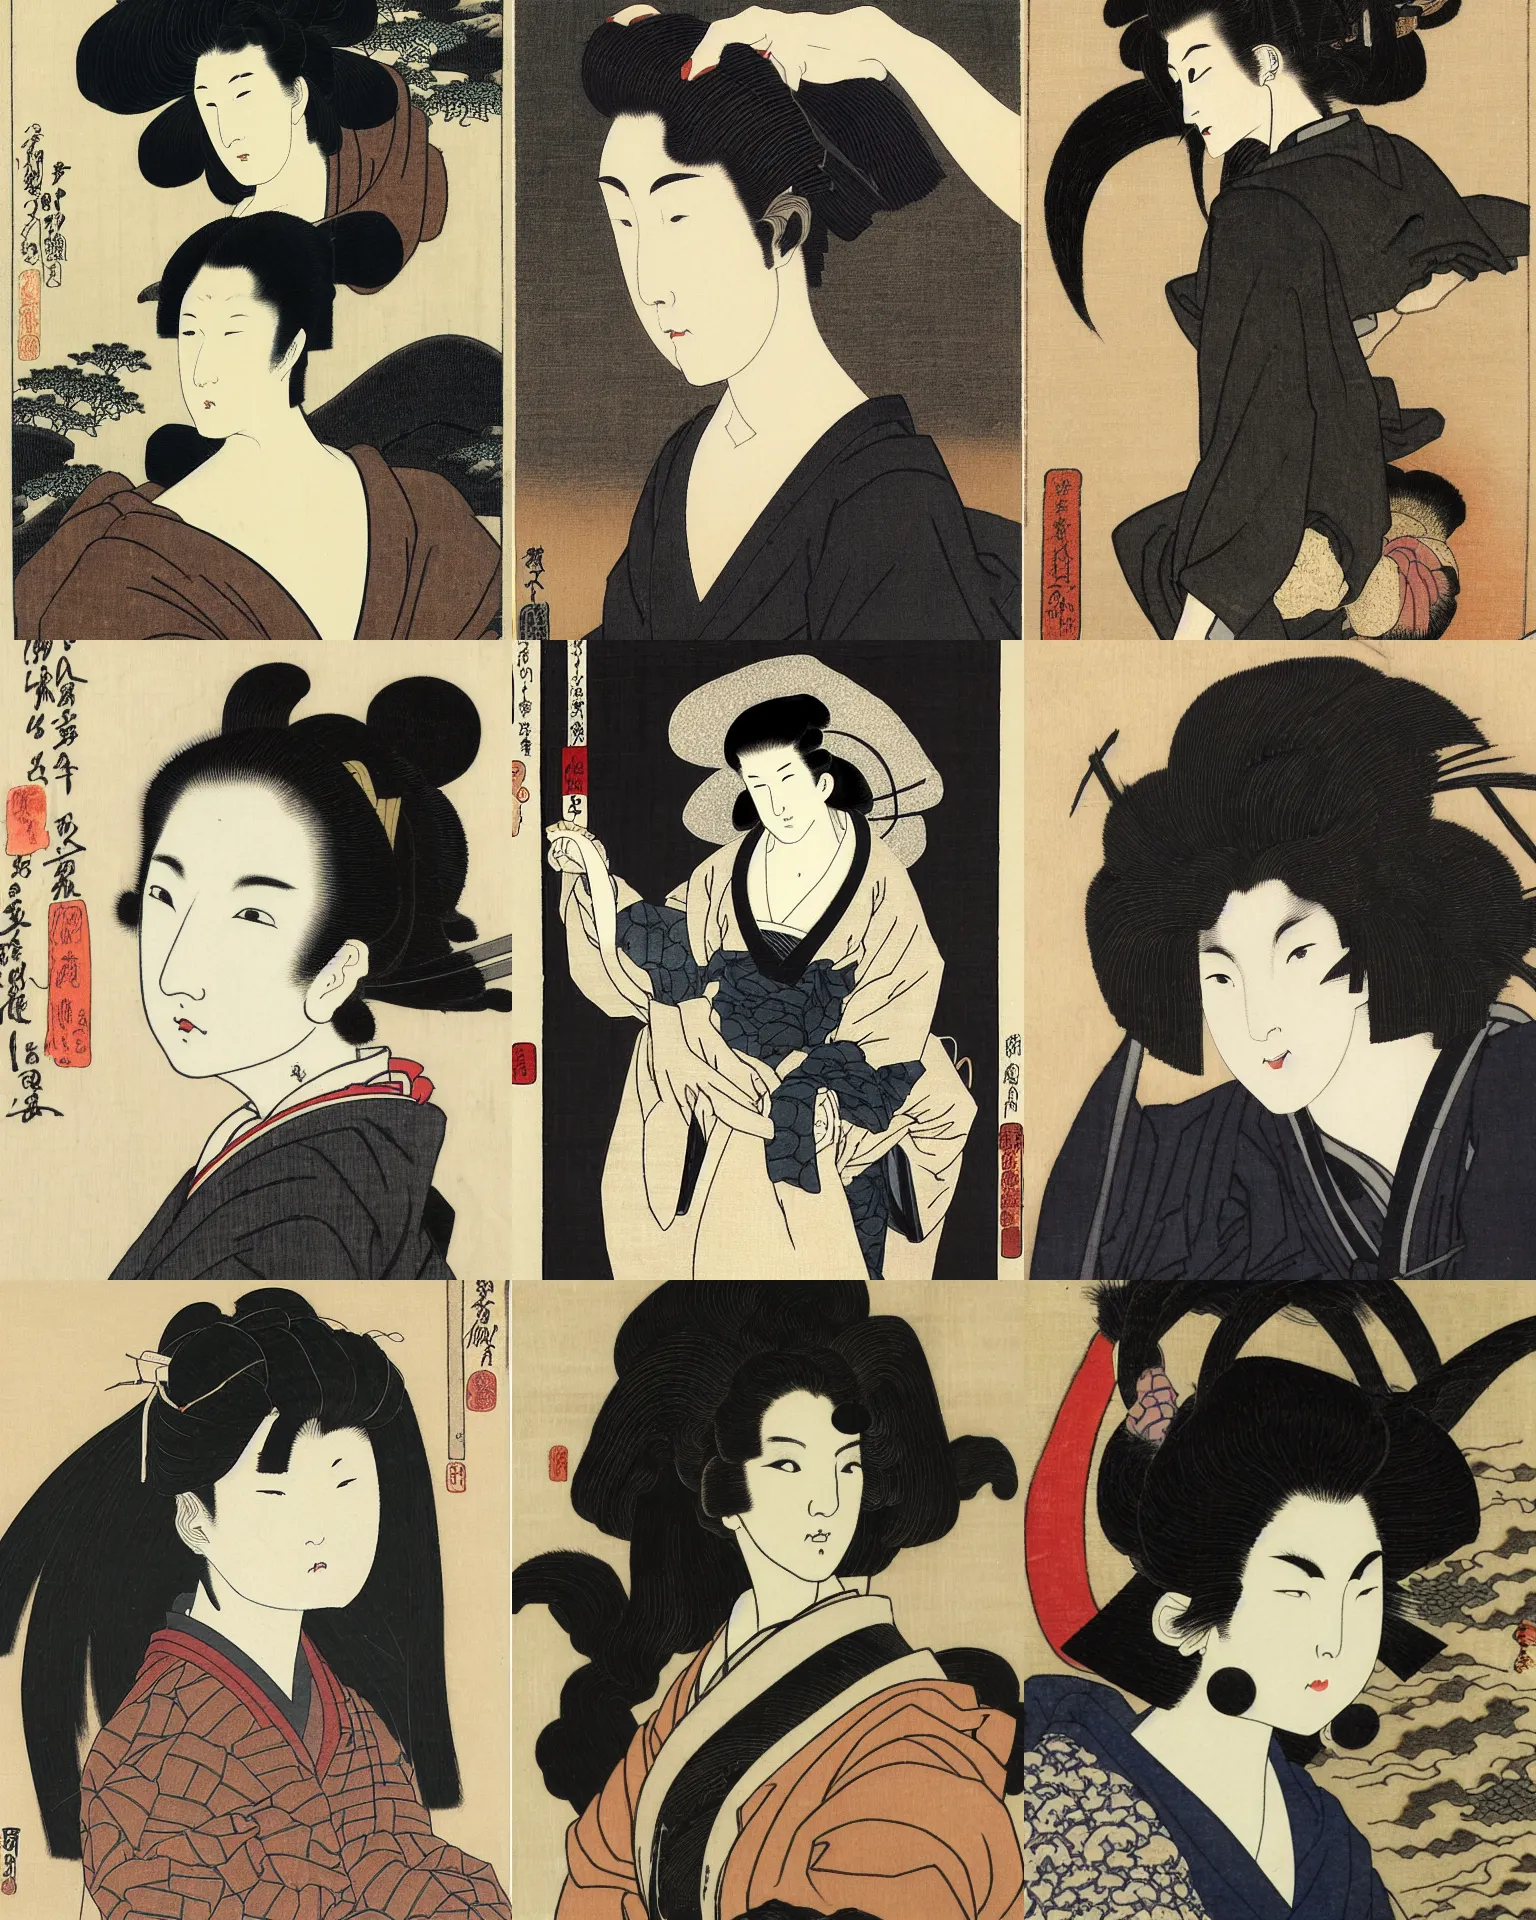 Prompt: A goth portrait by Katsushika Hokusai. Her hair is naturally dark brown and cut into a short, messy pixie cut. She has a slightly rounded face, with a pointed chin, large entirely-black eyes, and a small nose. She is wearing a black tank top, a black leather jacket, a black knee-length skirt, a black choker, and black leather boots.